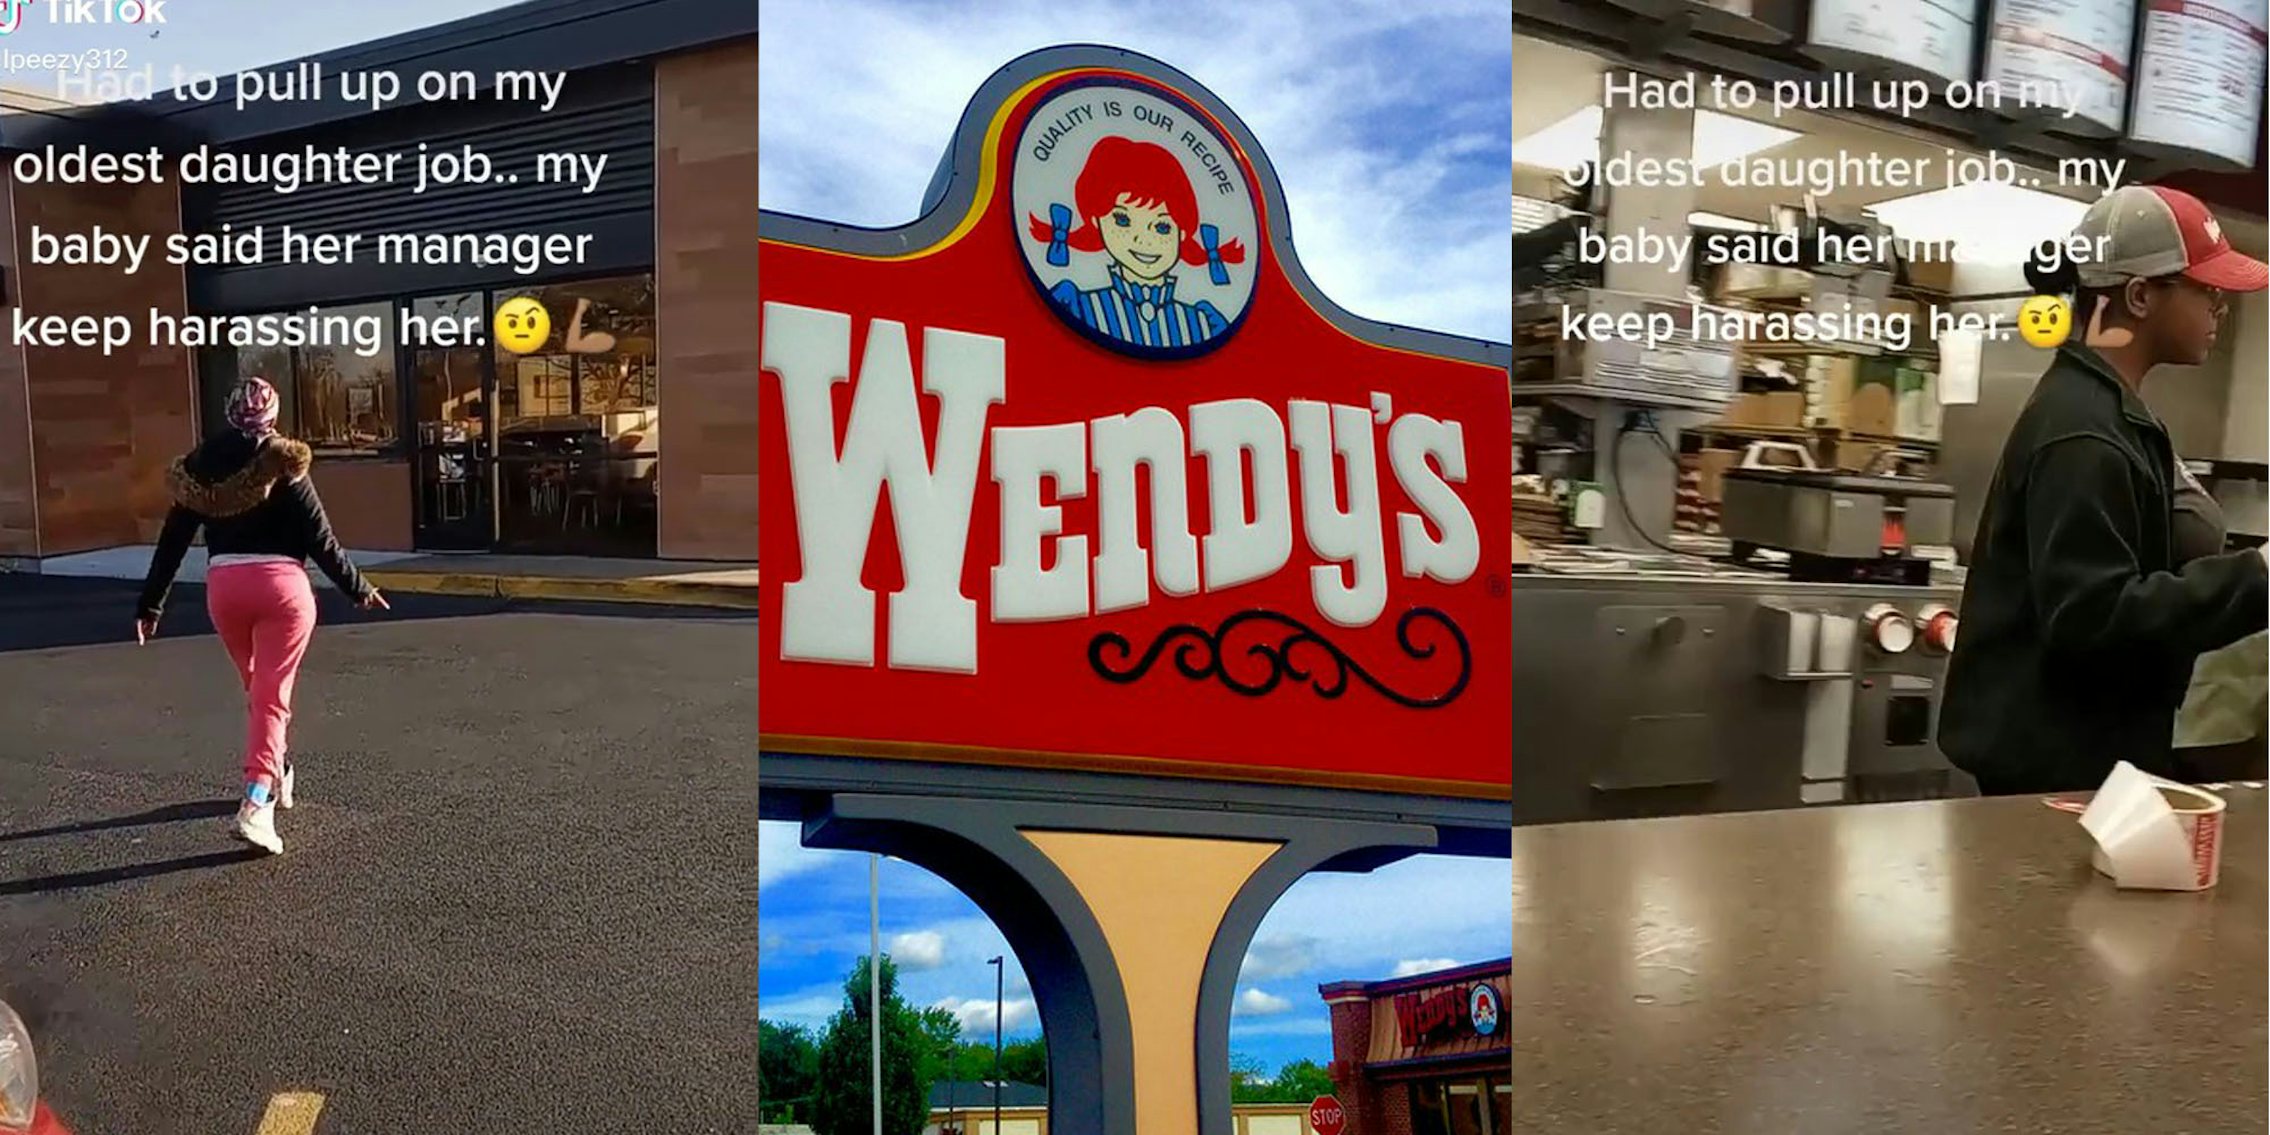 woman walking into fast food restaurant with caption 'had to pull up on my older daughter job. my baby said her manager keep harassing her' (l) wendy's sign (c) inside wendy's